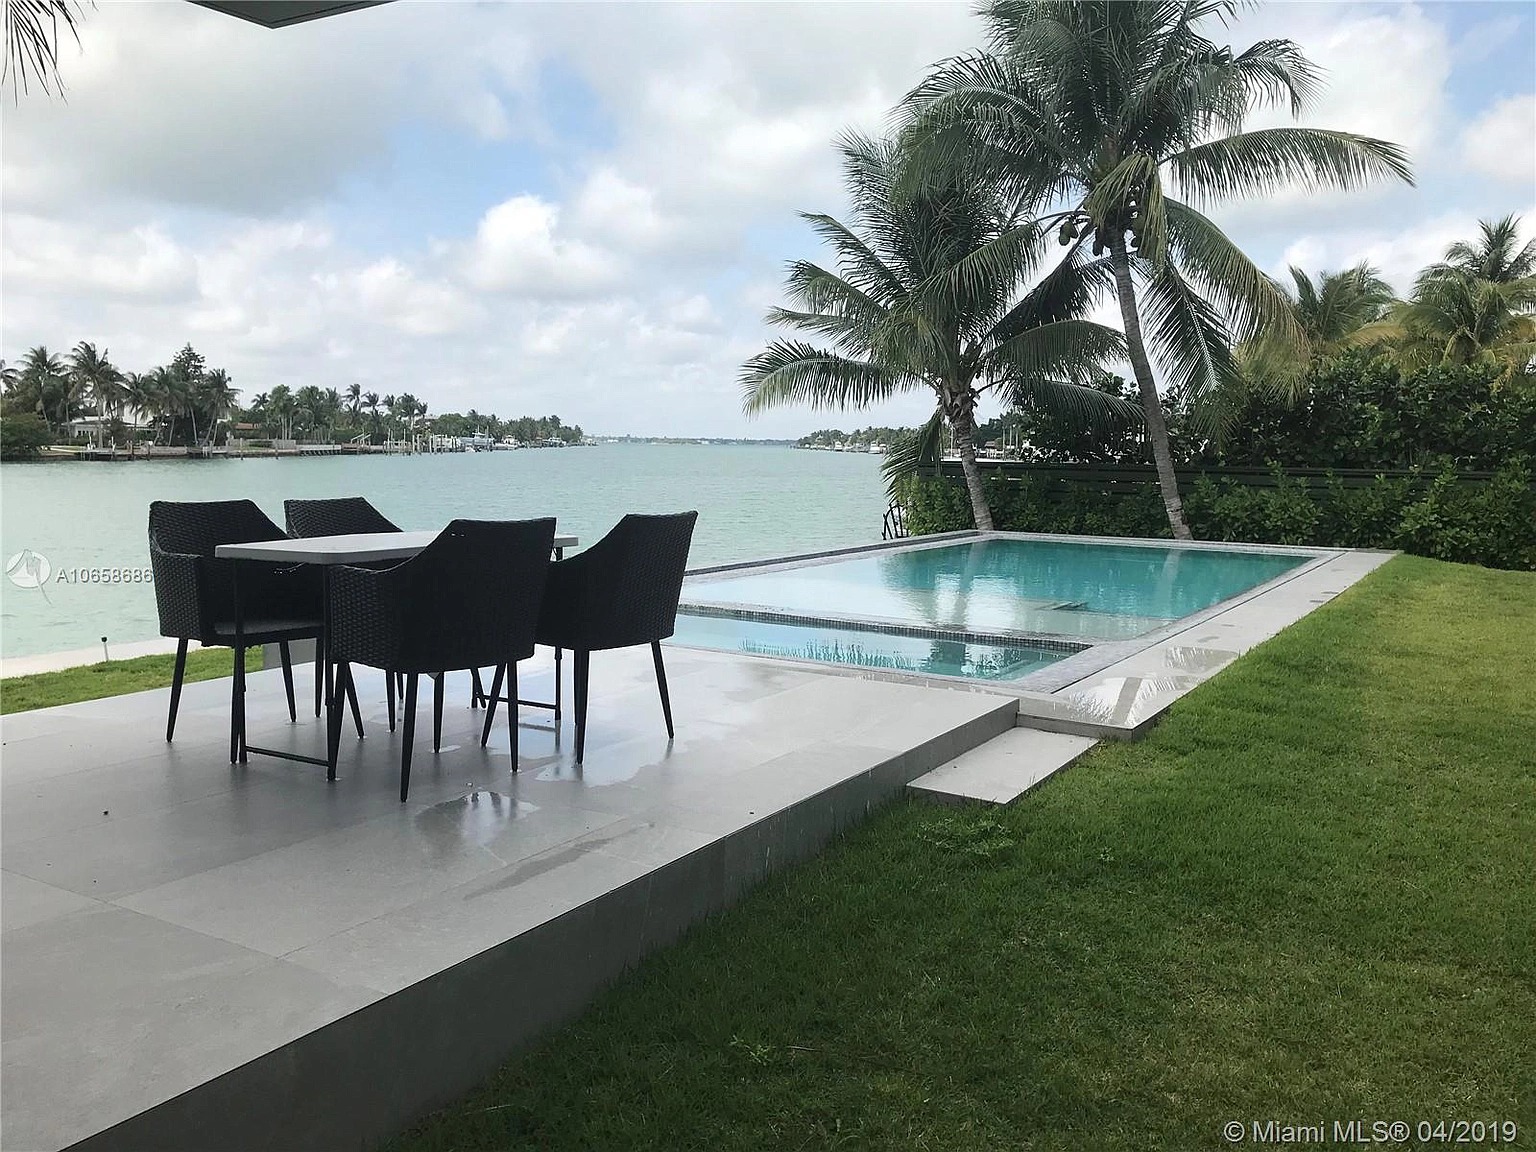 1234 S Biscayne Point Rd, Miami Beach, FL 33141 - $5,995,000 home for sale, house images, photos and pics gallery